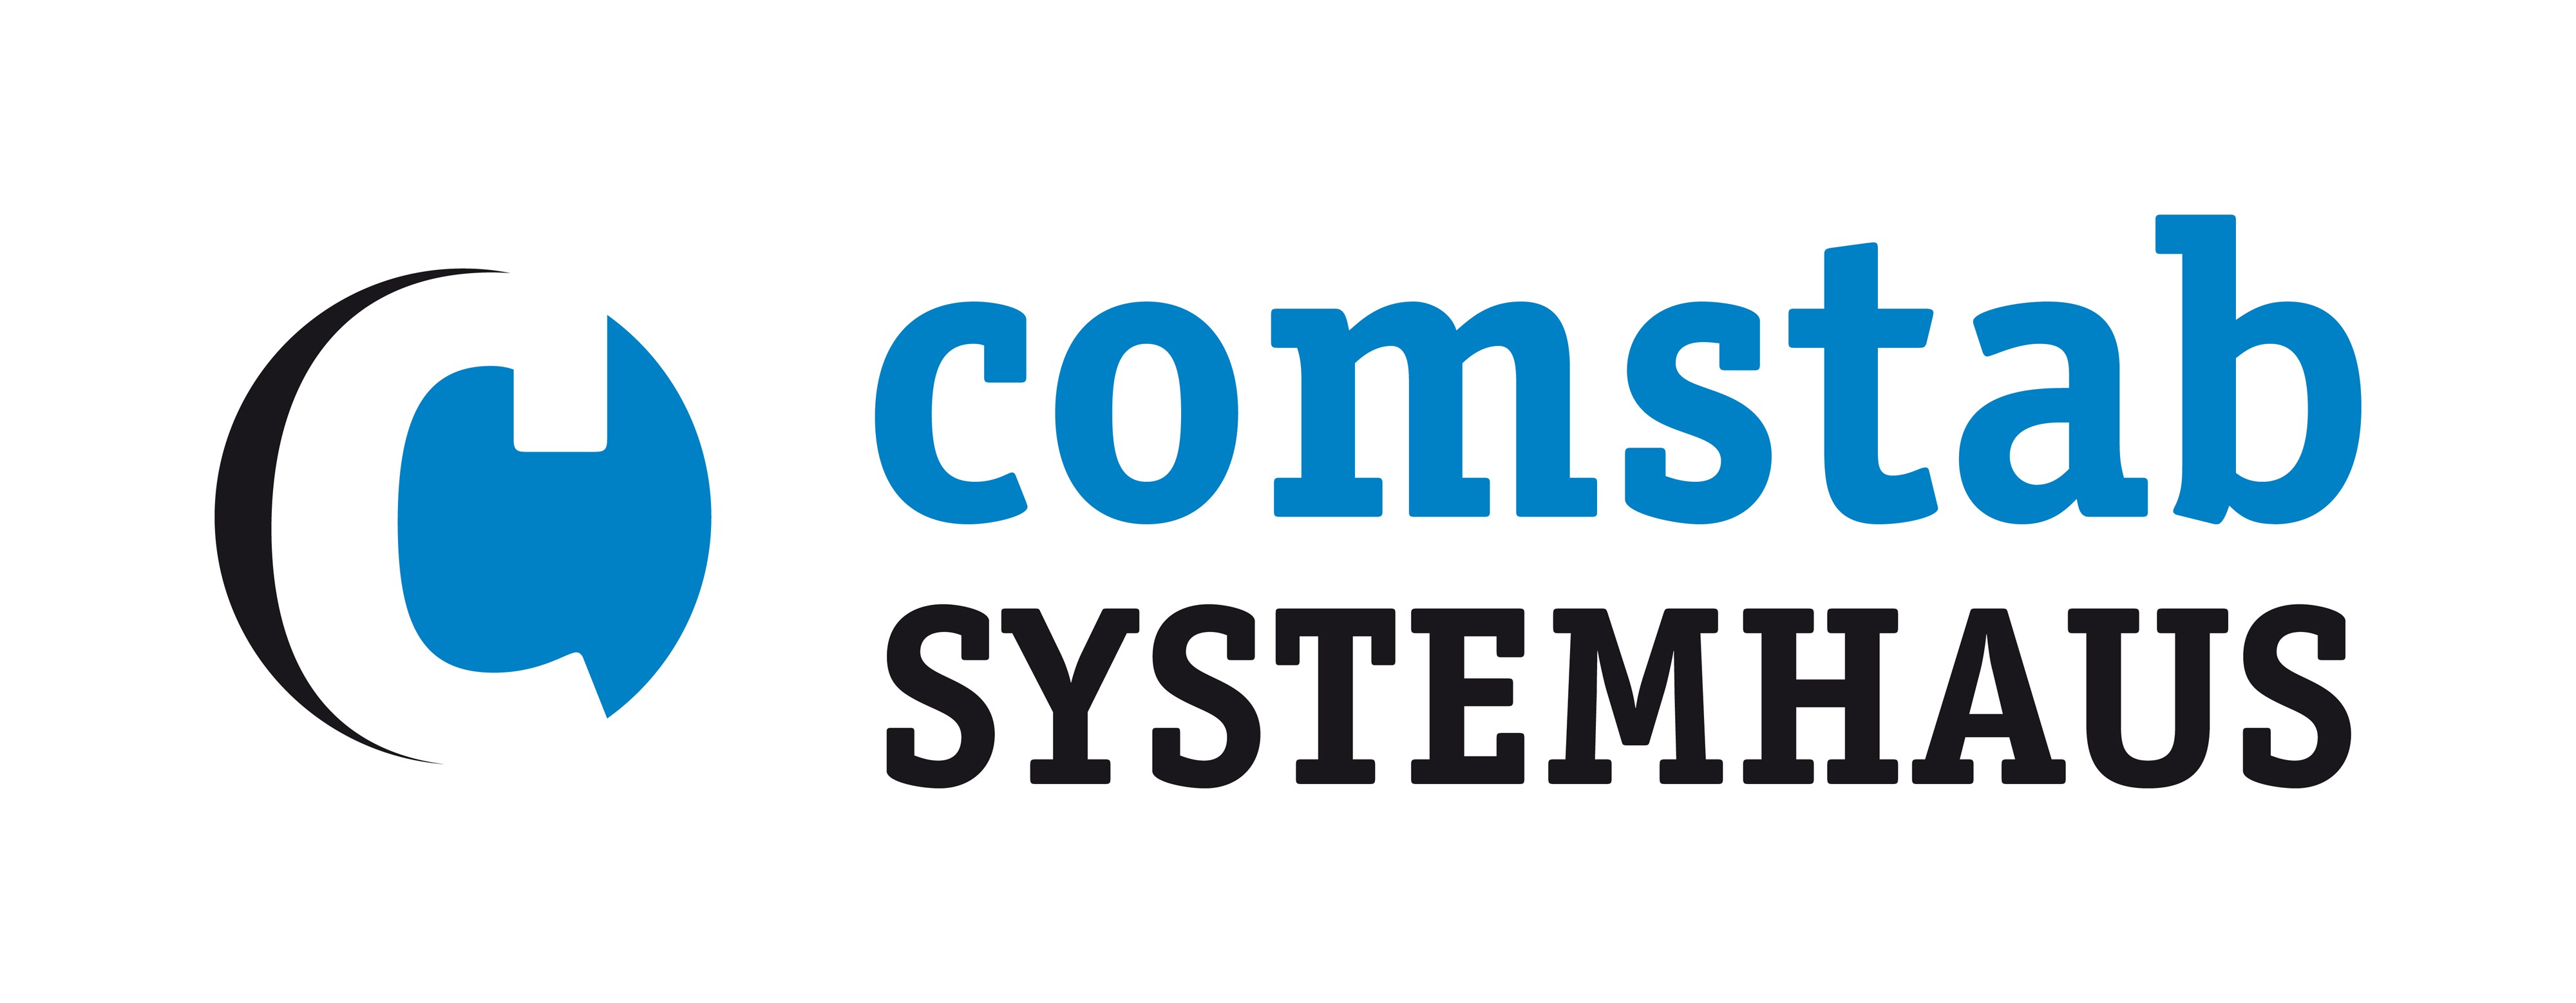 comstab SYSTEMHAUS GmbH